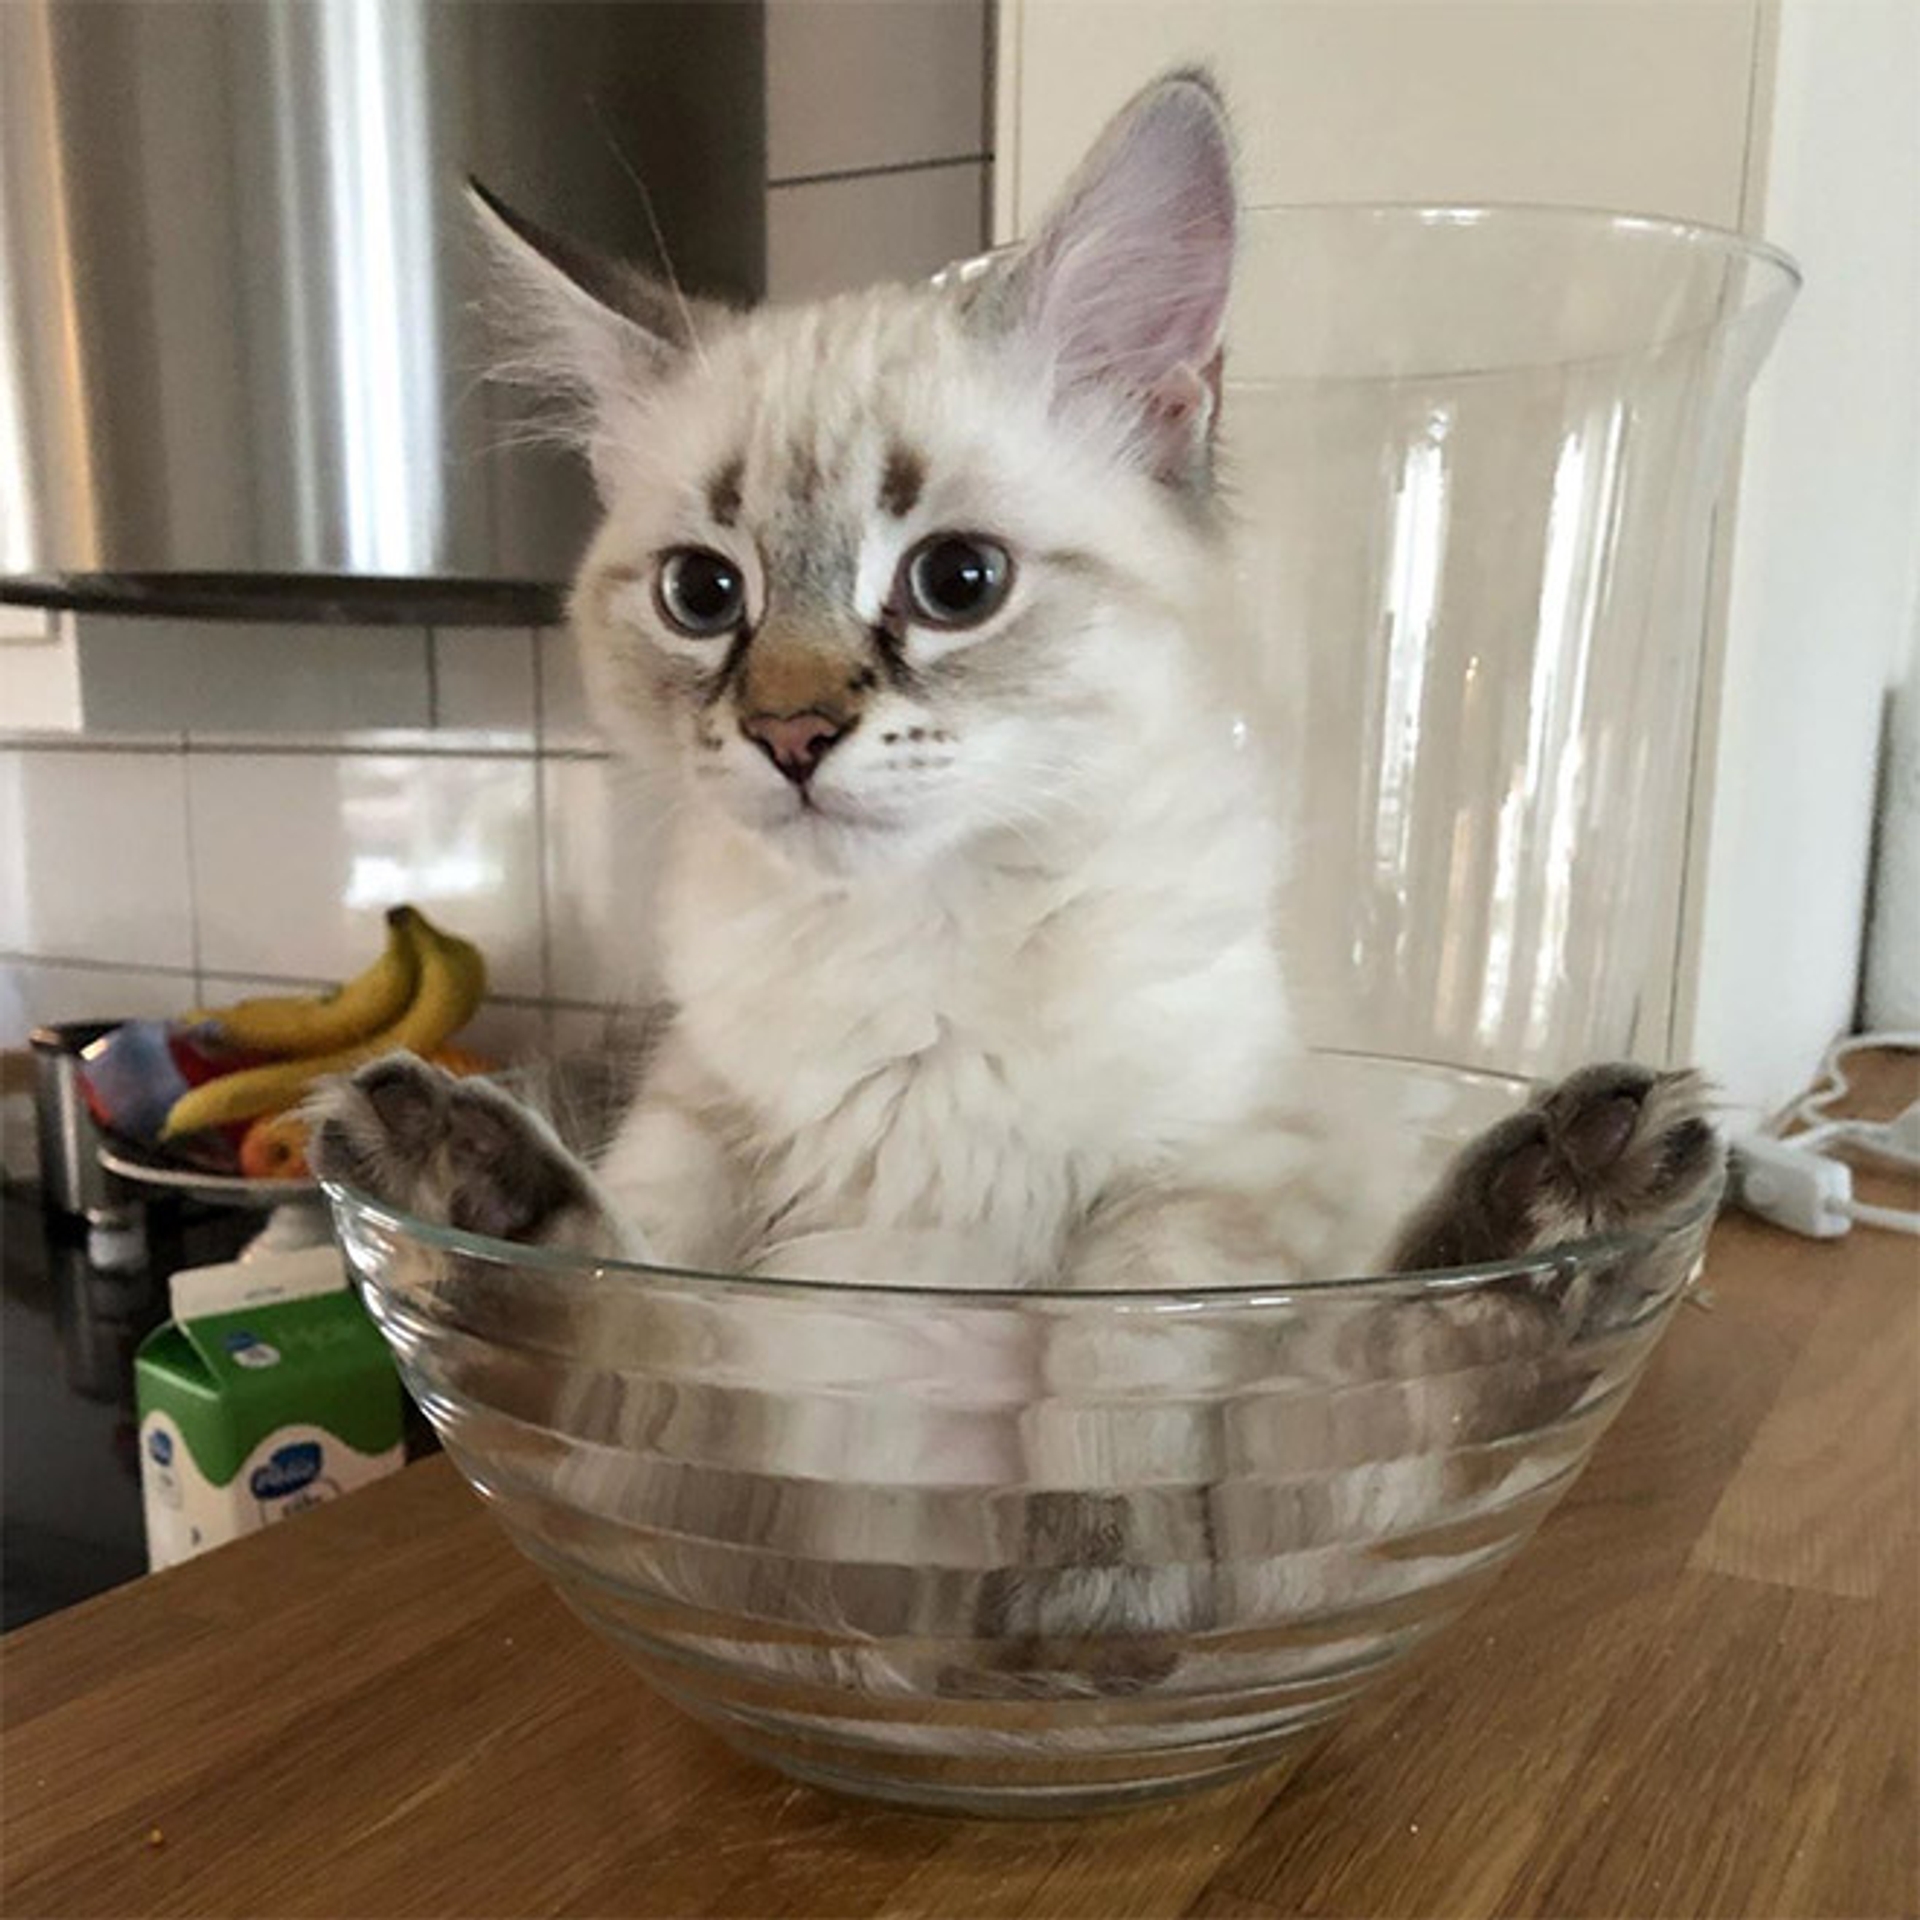 cats-in-bowls19